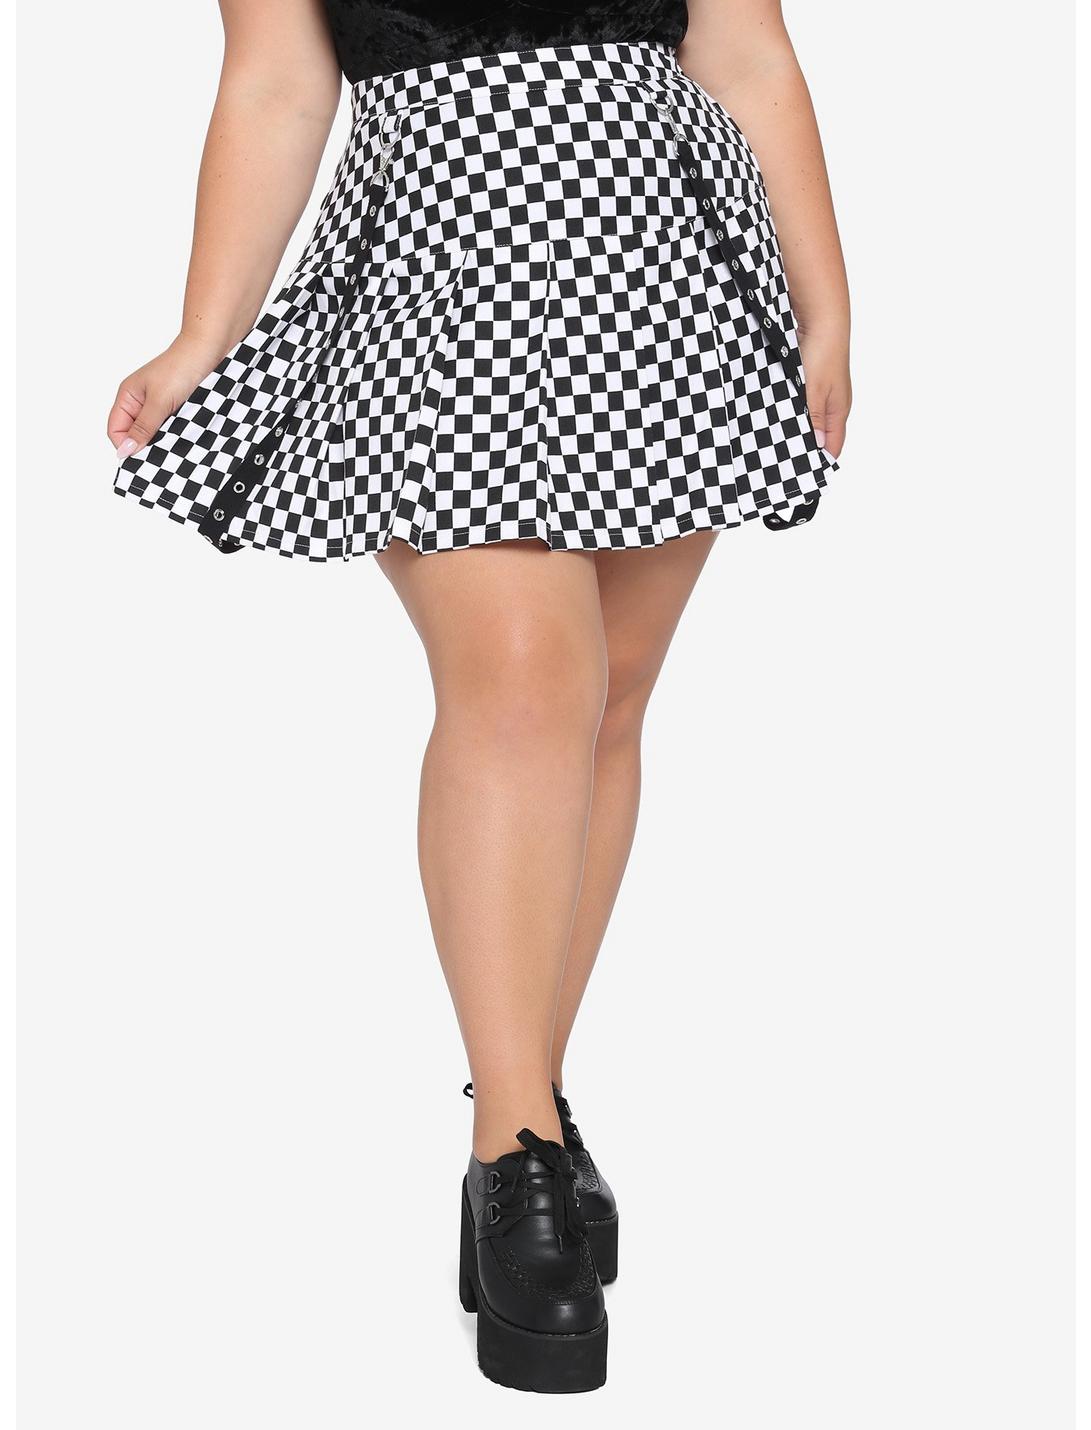 Silver Grommet Pleated Checkered Suspender Skirt Plus Size, MULTI, hi-res